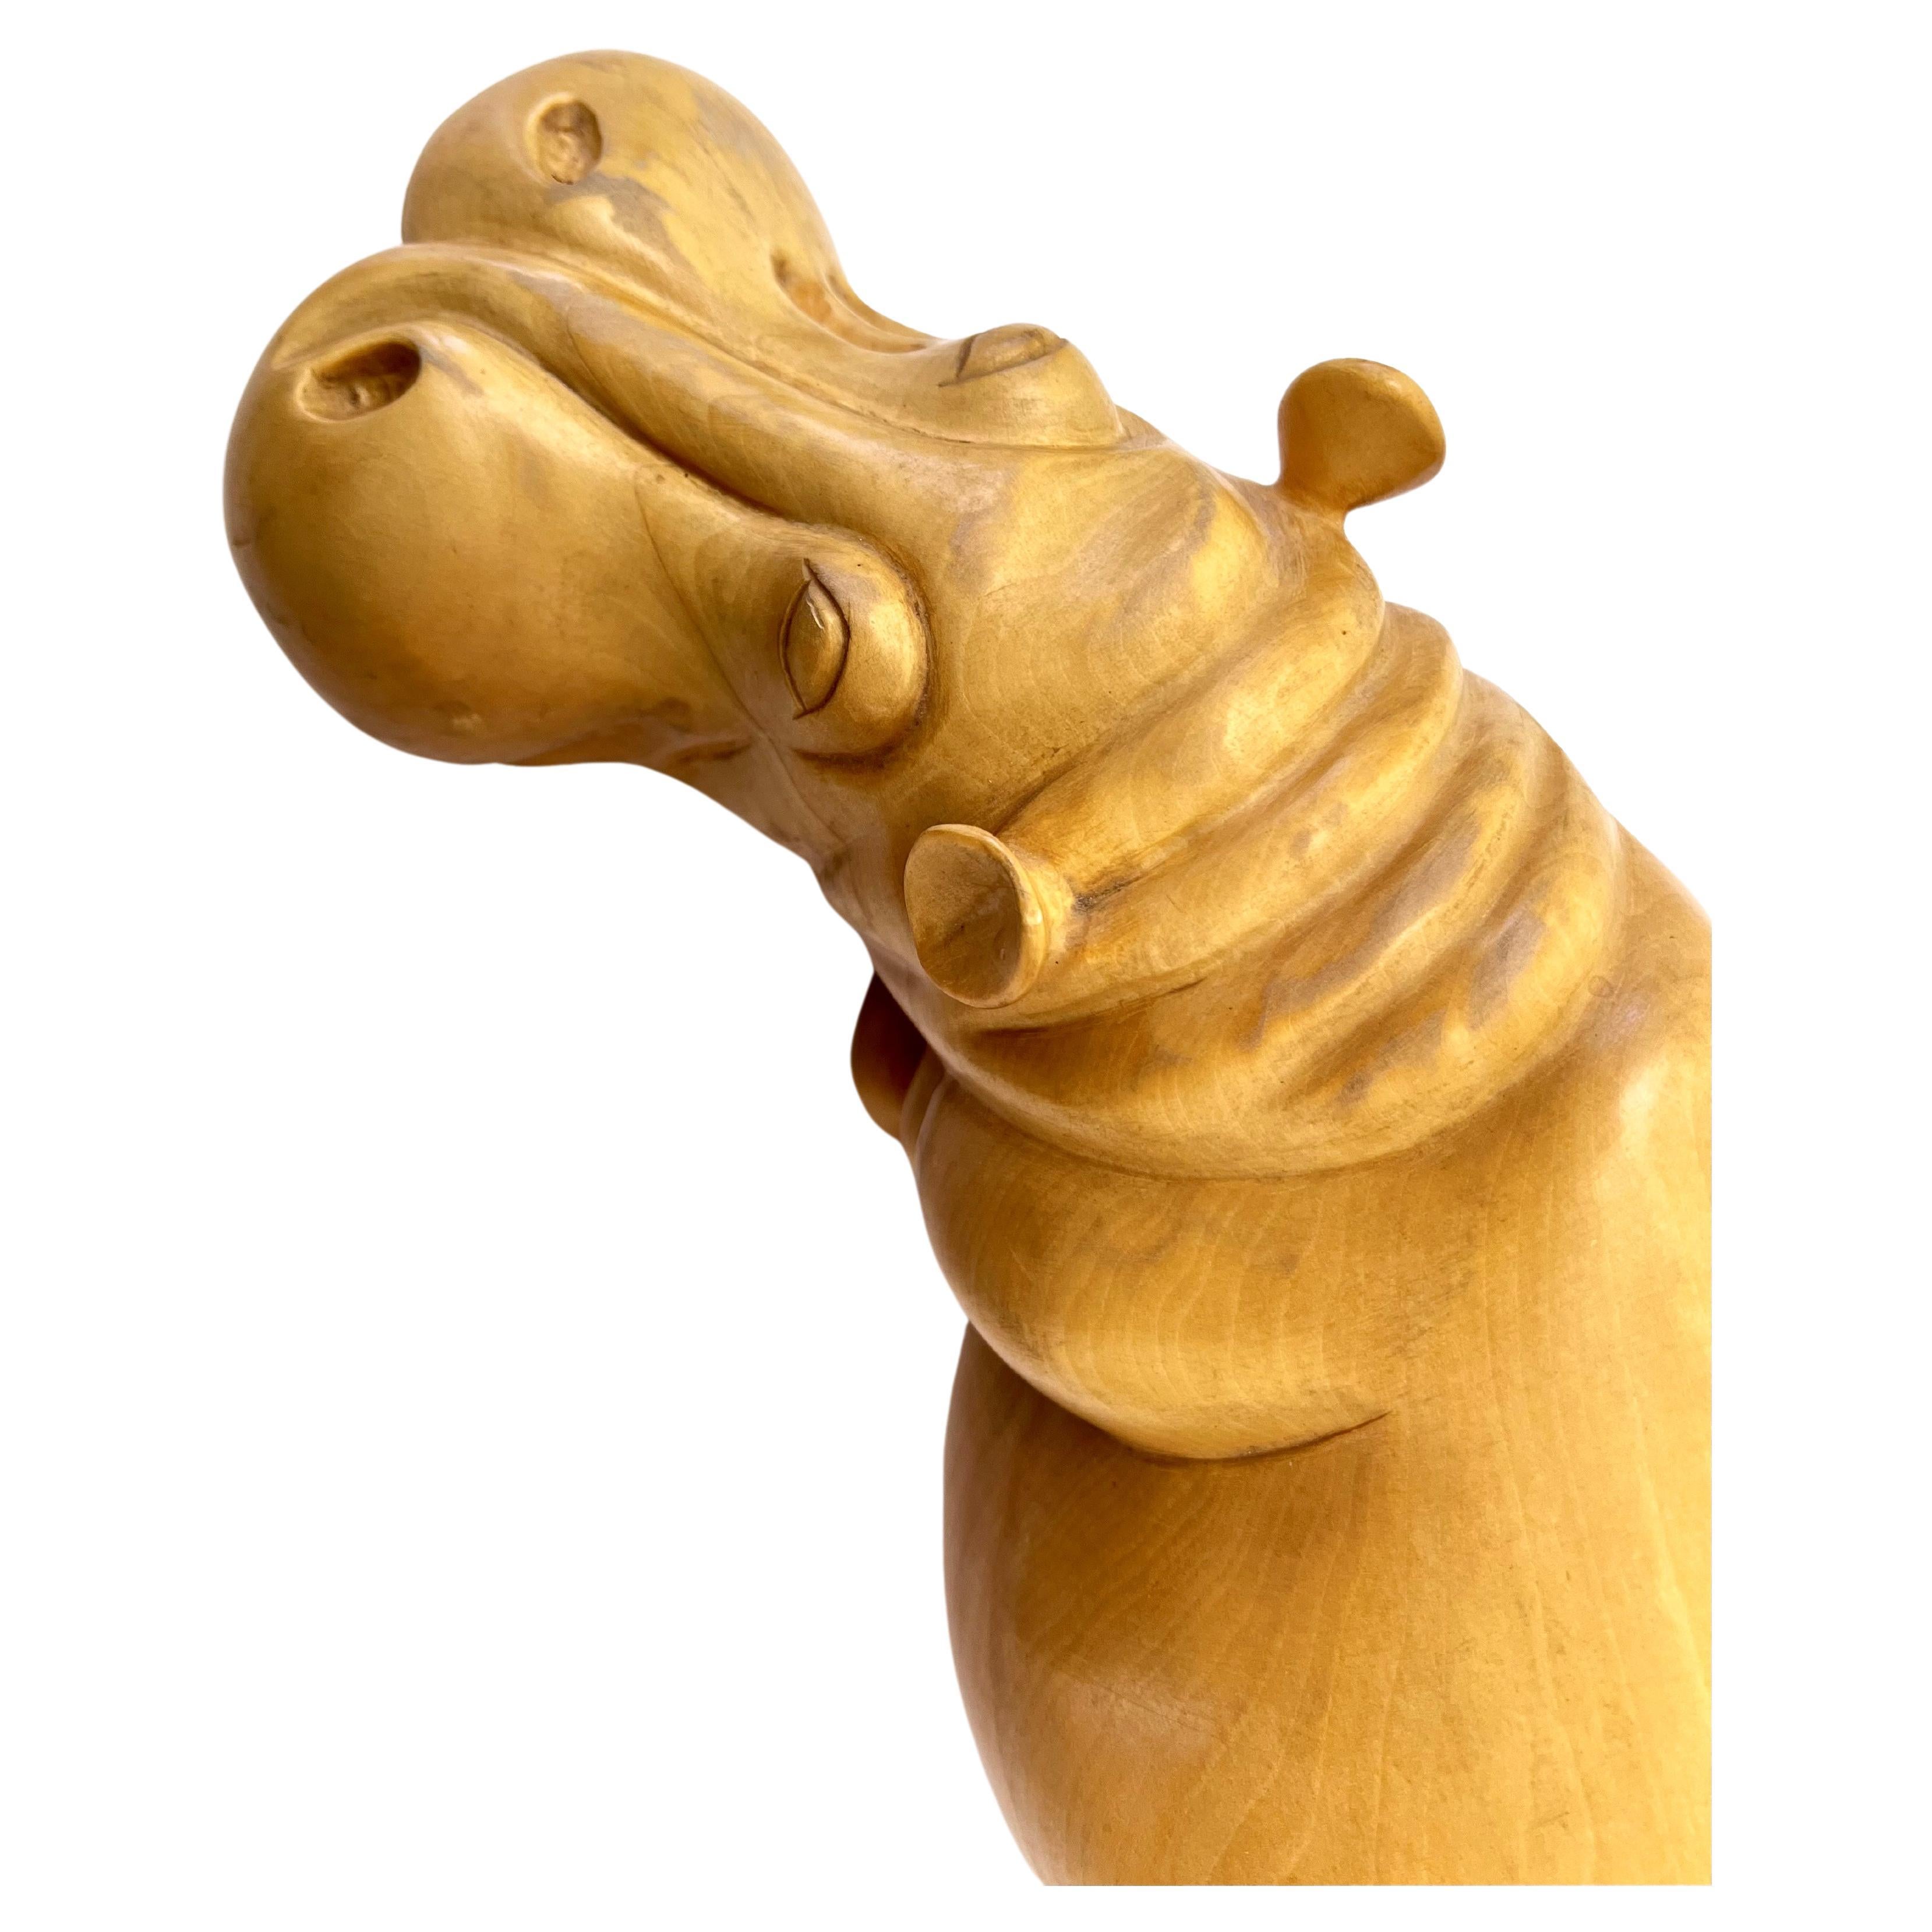 Fabulous XL Hand Carved Wooden Hippo Sculpture from Florence, Italy.   A whimsical and unique sculpture he's sure to make a happy statement. 
From François-Xavier and Claude Lalanne to Bitossi, hippos are a midcentury animal that are both amazing